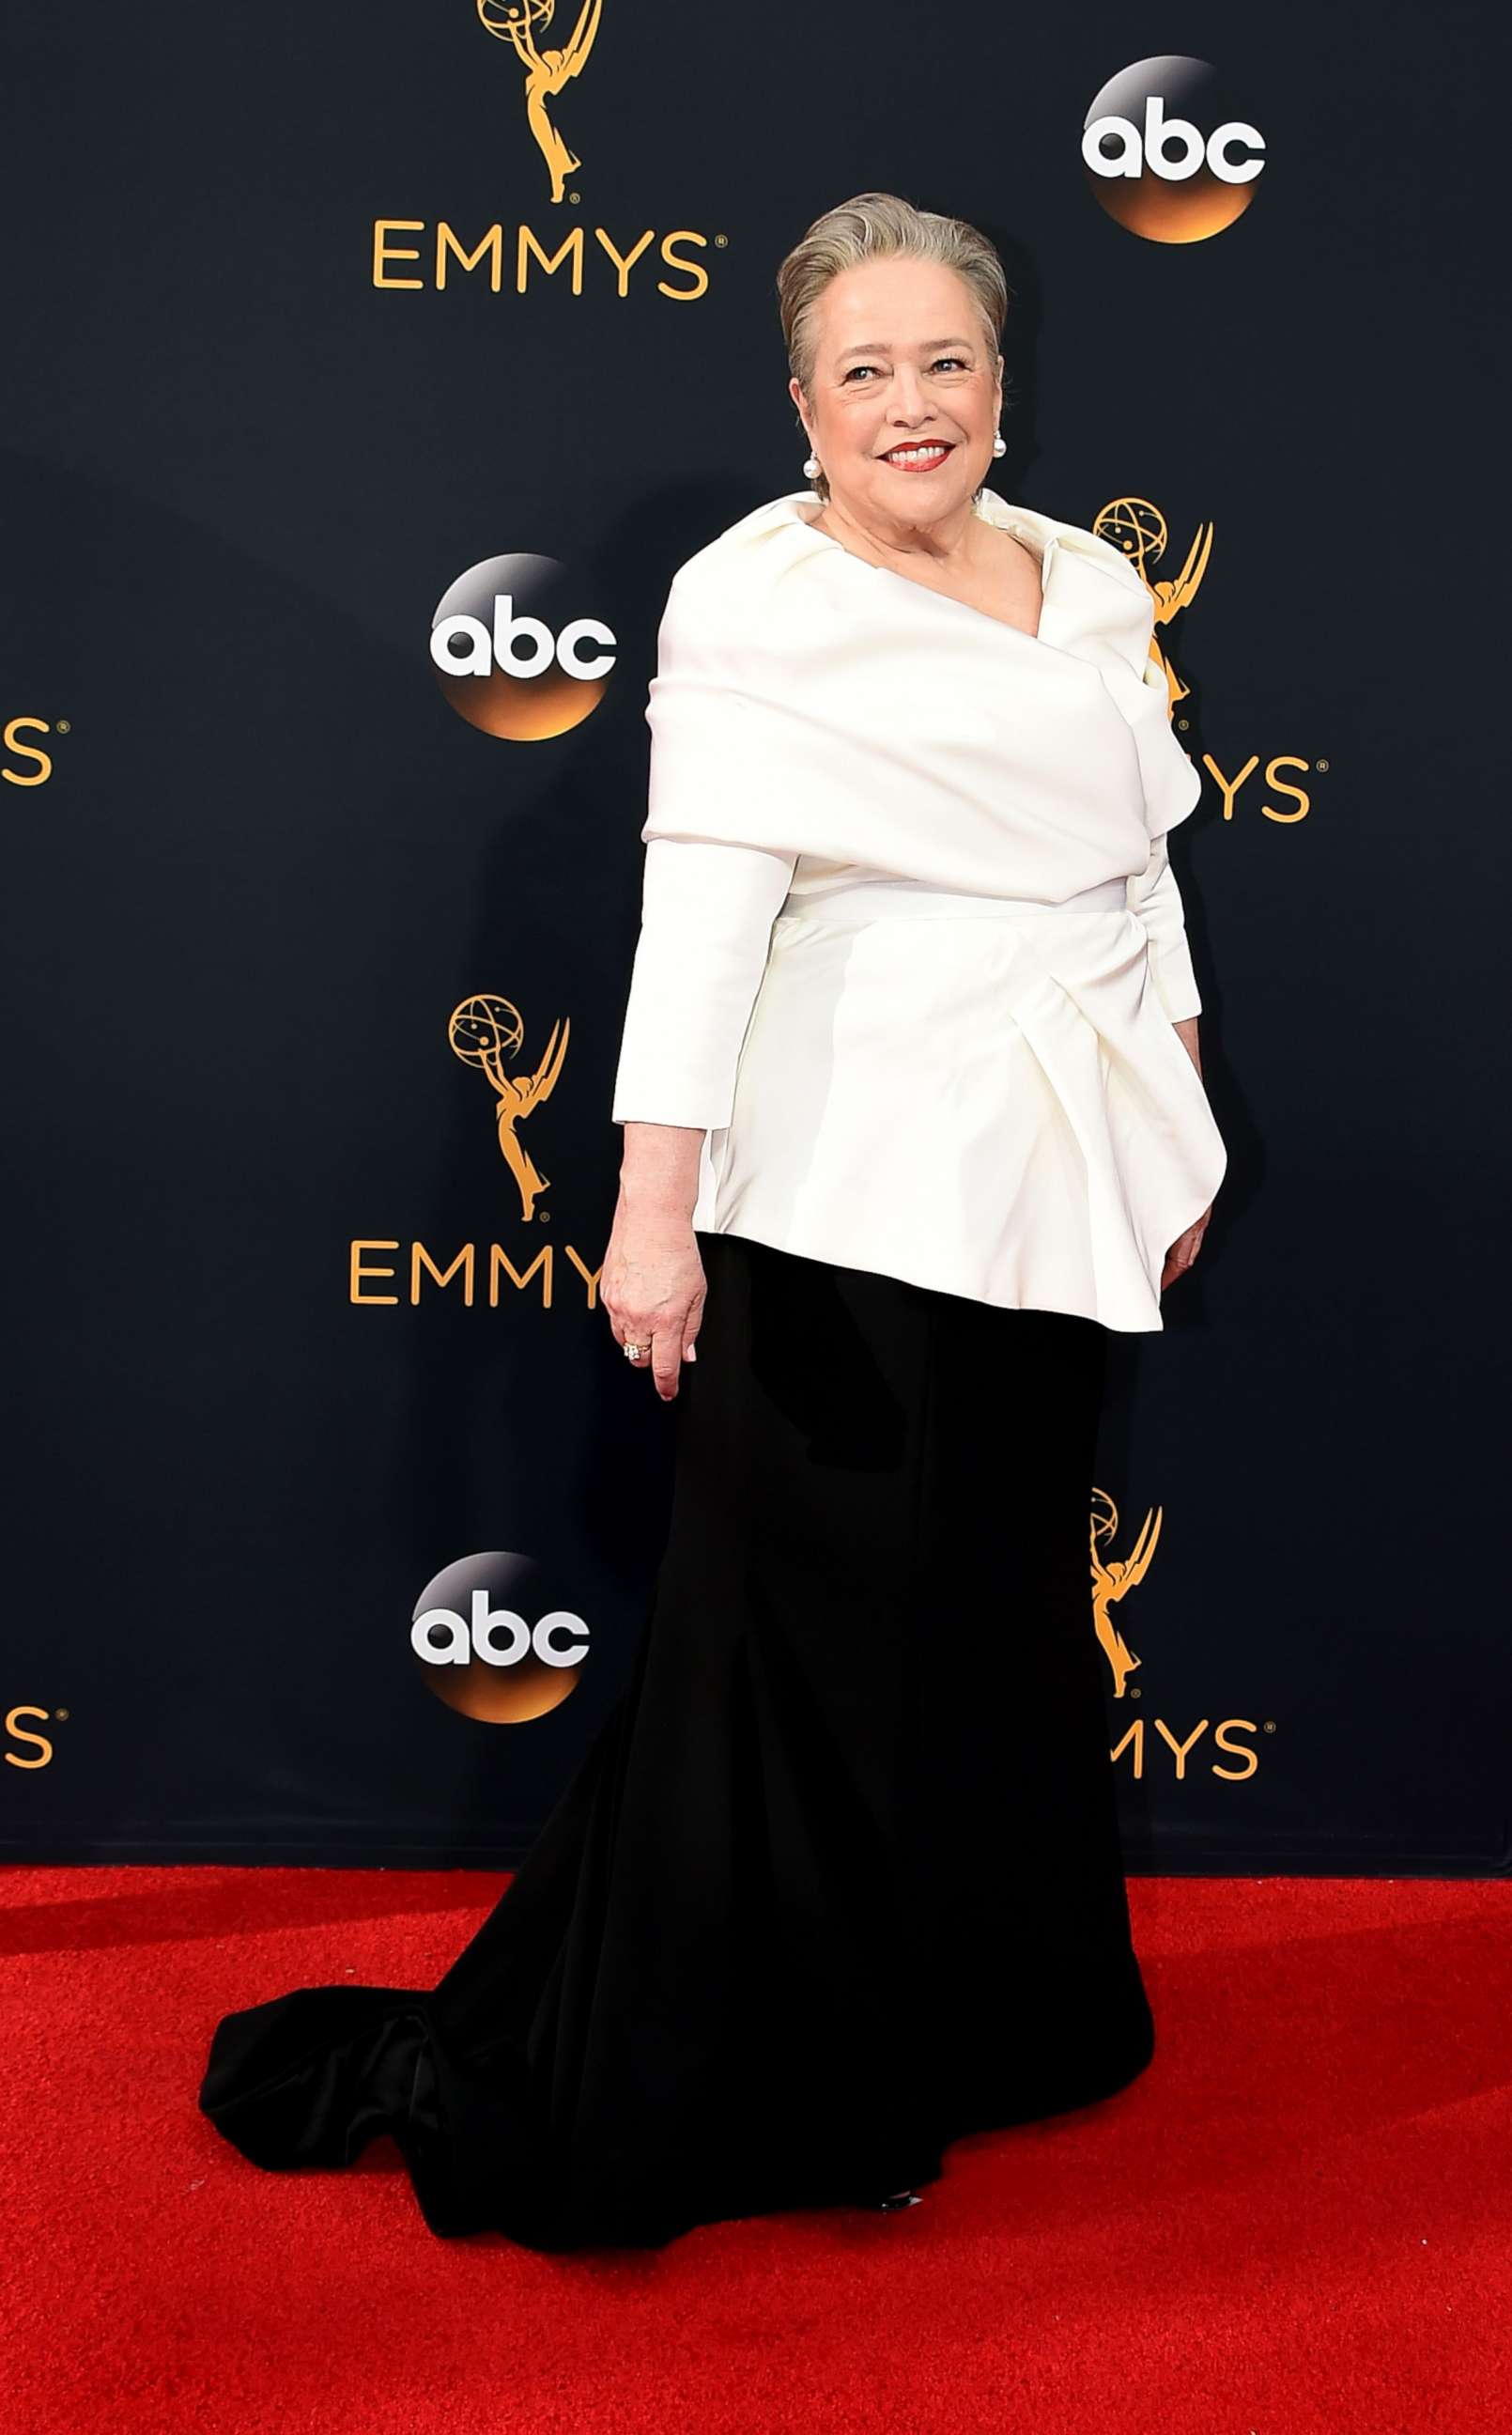 PHOTO: Actress Kathy Bates arrives for the 68th Emmy Awards on Sept. 18, 2016, at the Microsoft Theatre in Los Angeles.